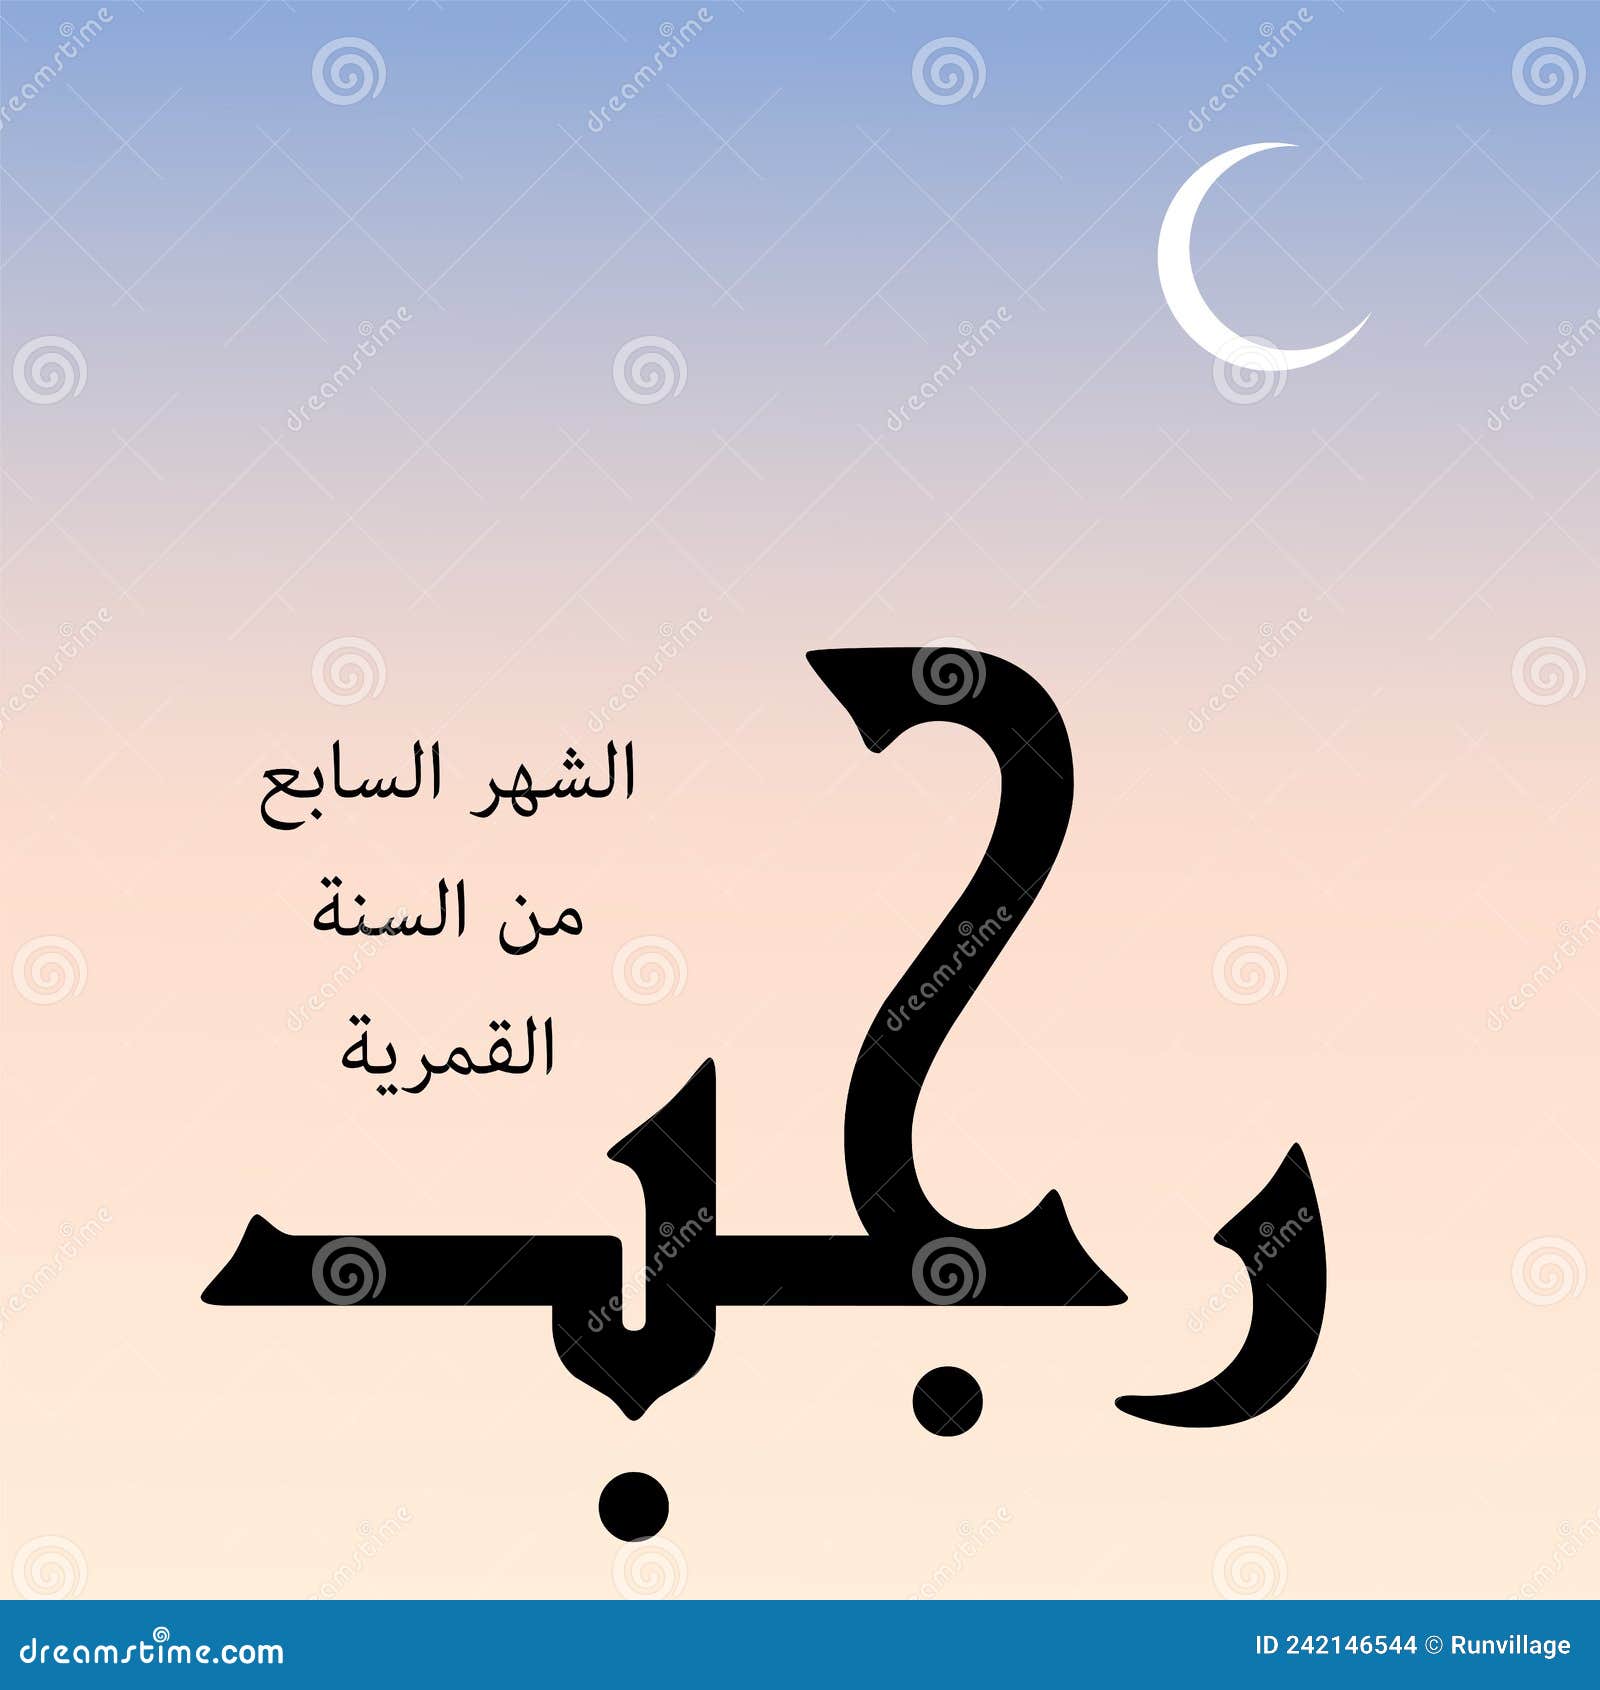 rajab is the seventh month of the islamic calendar. the lexical definition of the classical arabic verb rajaba is `to respect`.